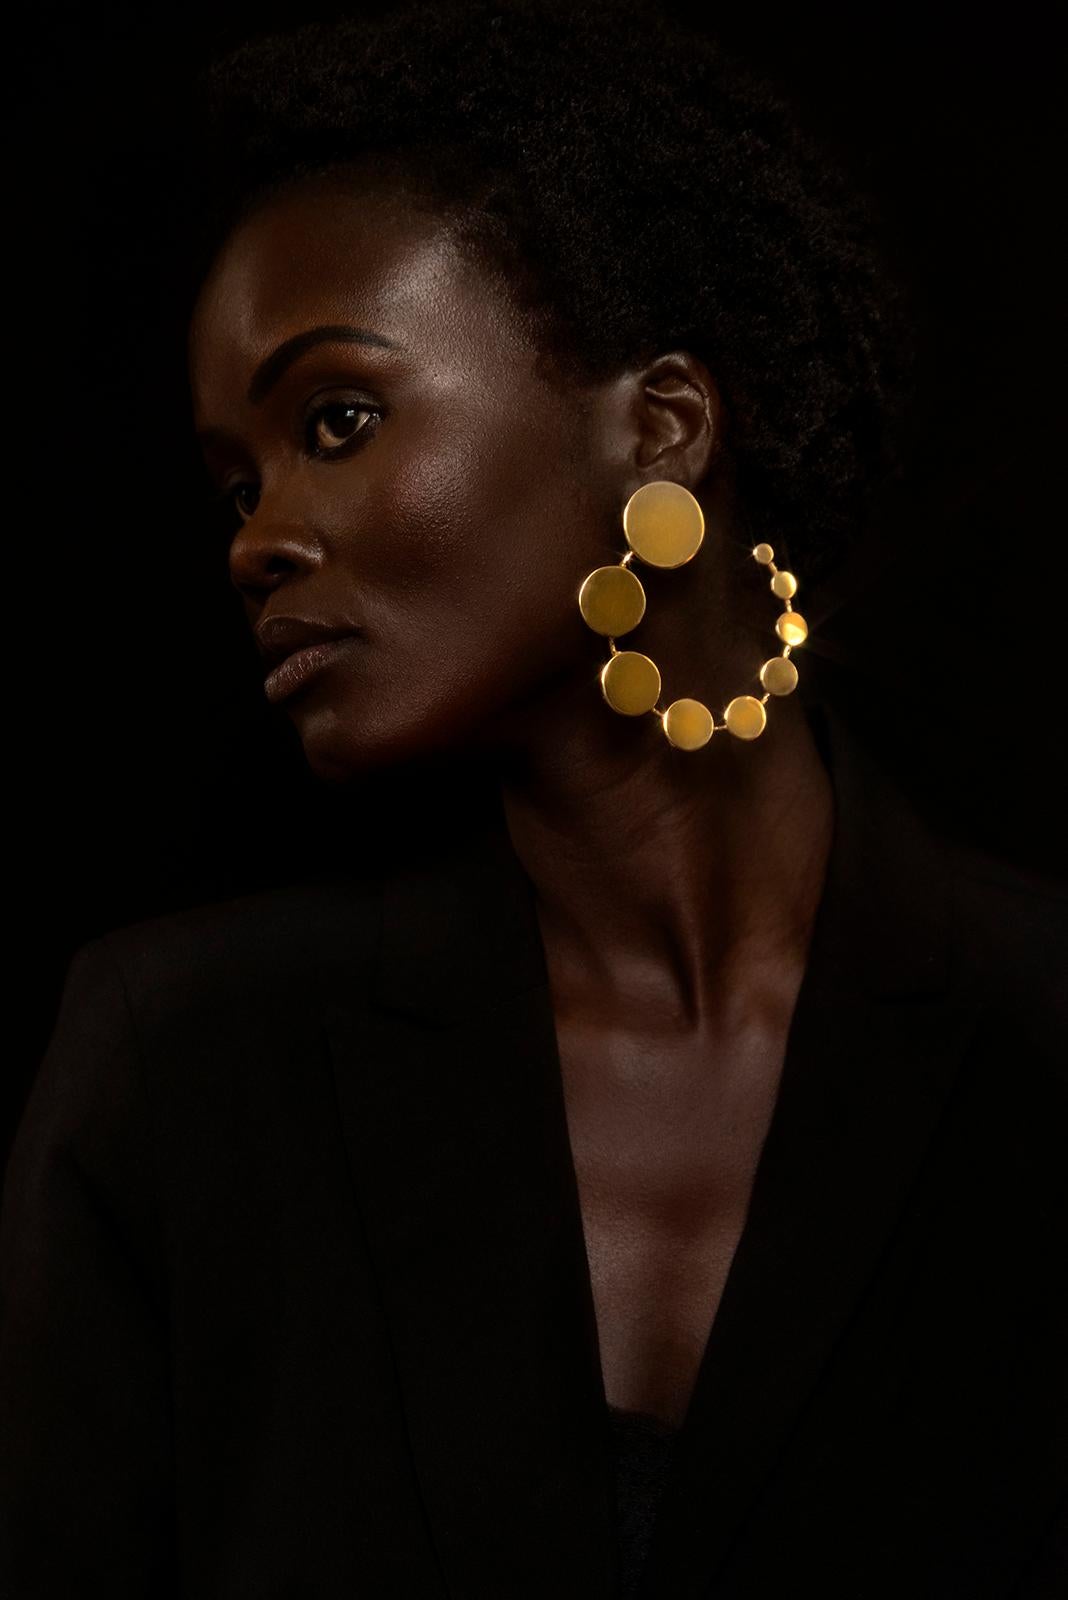 14K Vermeil 9 Disk Progression Hoop Earrings from Made by Malyia.

Made to order
Production time 3 weeks.

9 Disk earring with Progressively increasing disk. The geometric design is the classic hoop reimagined, signifying the process of gradually